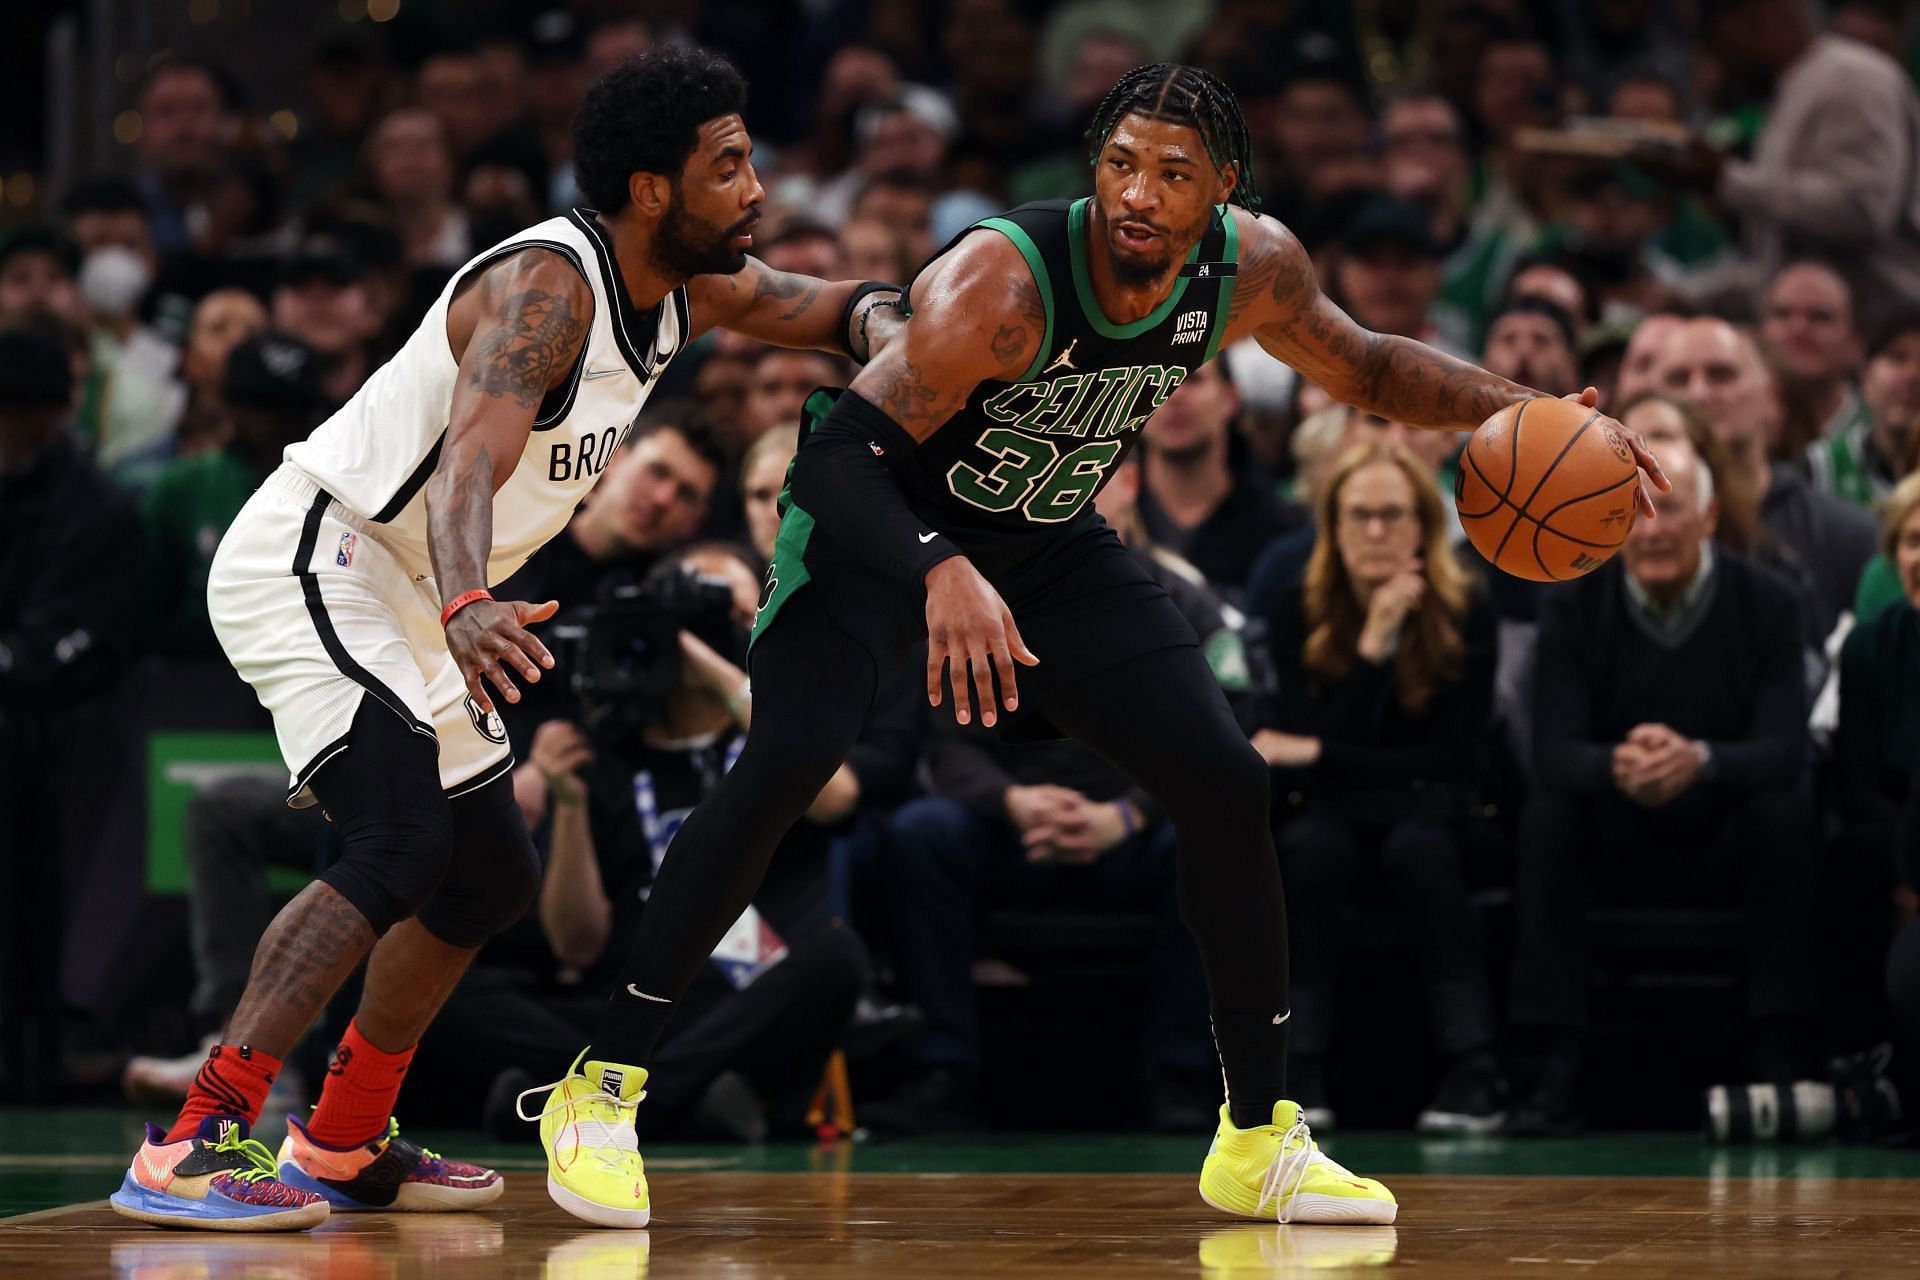 Kyrie Irving #11 of the Brooklyn Nets defends Marcus Smart #36 of the Boston Celtics